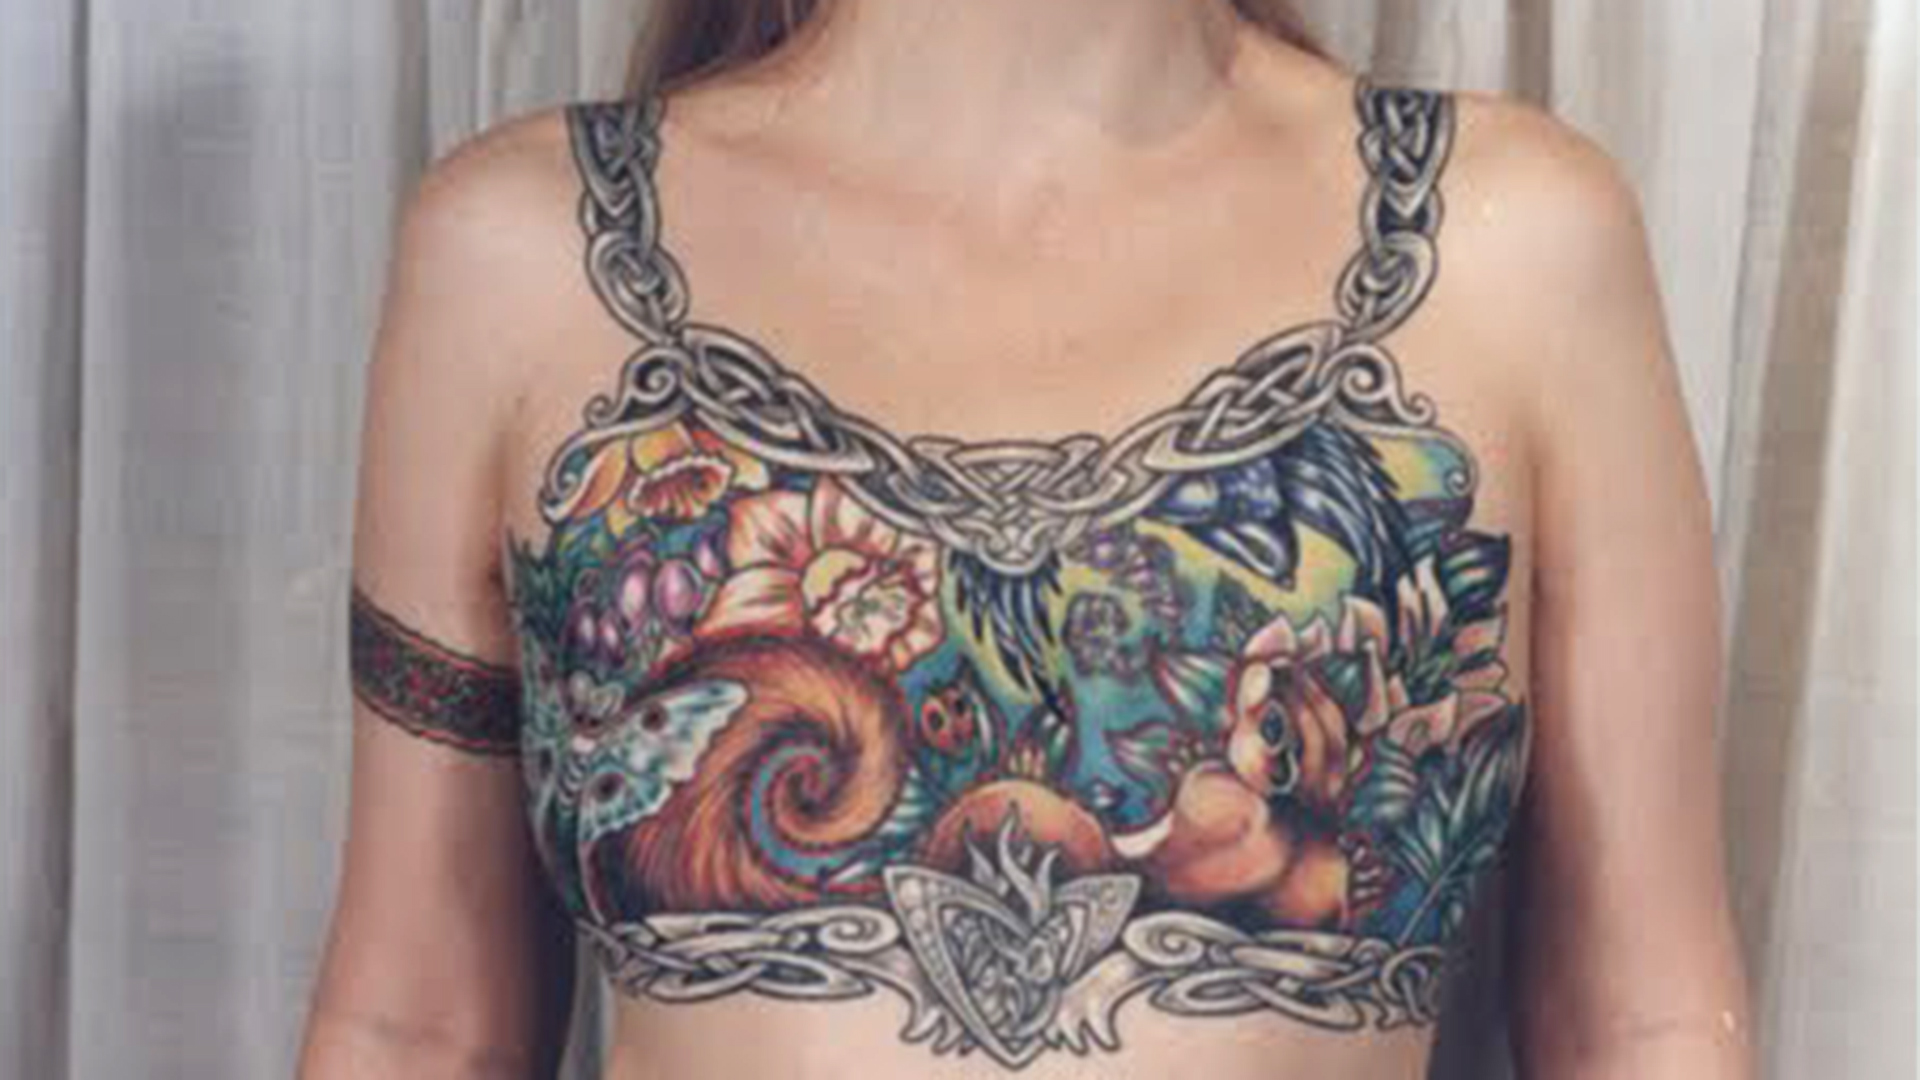 Double mastectomy tattoos images